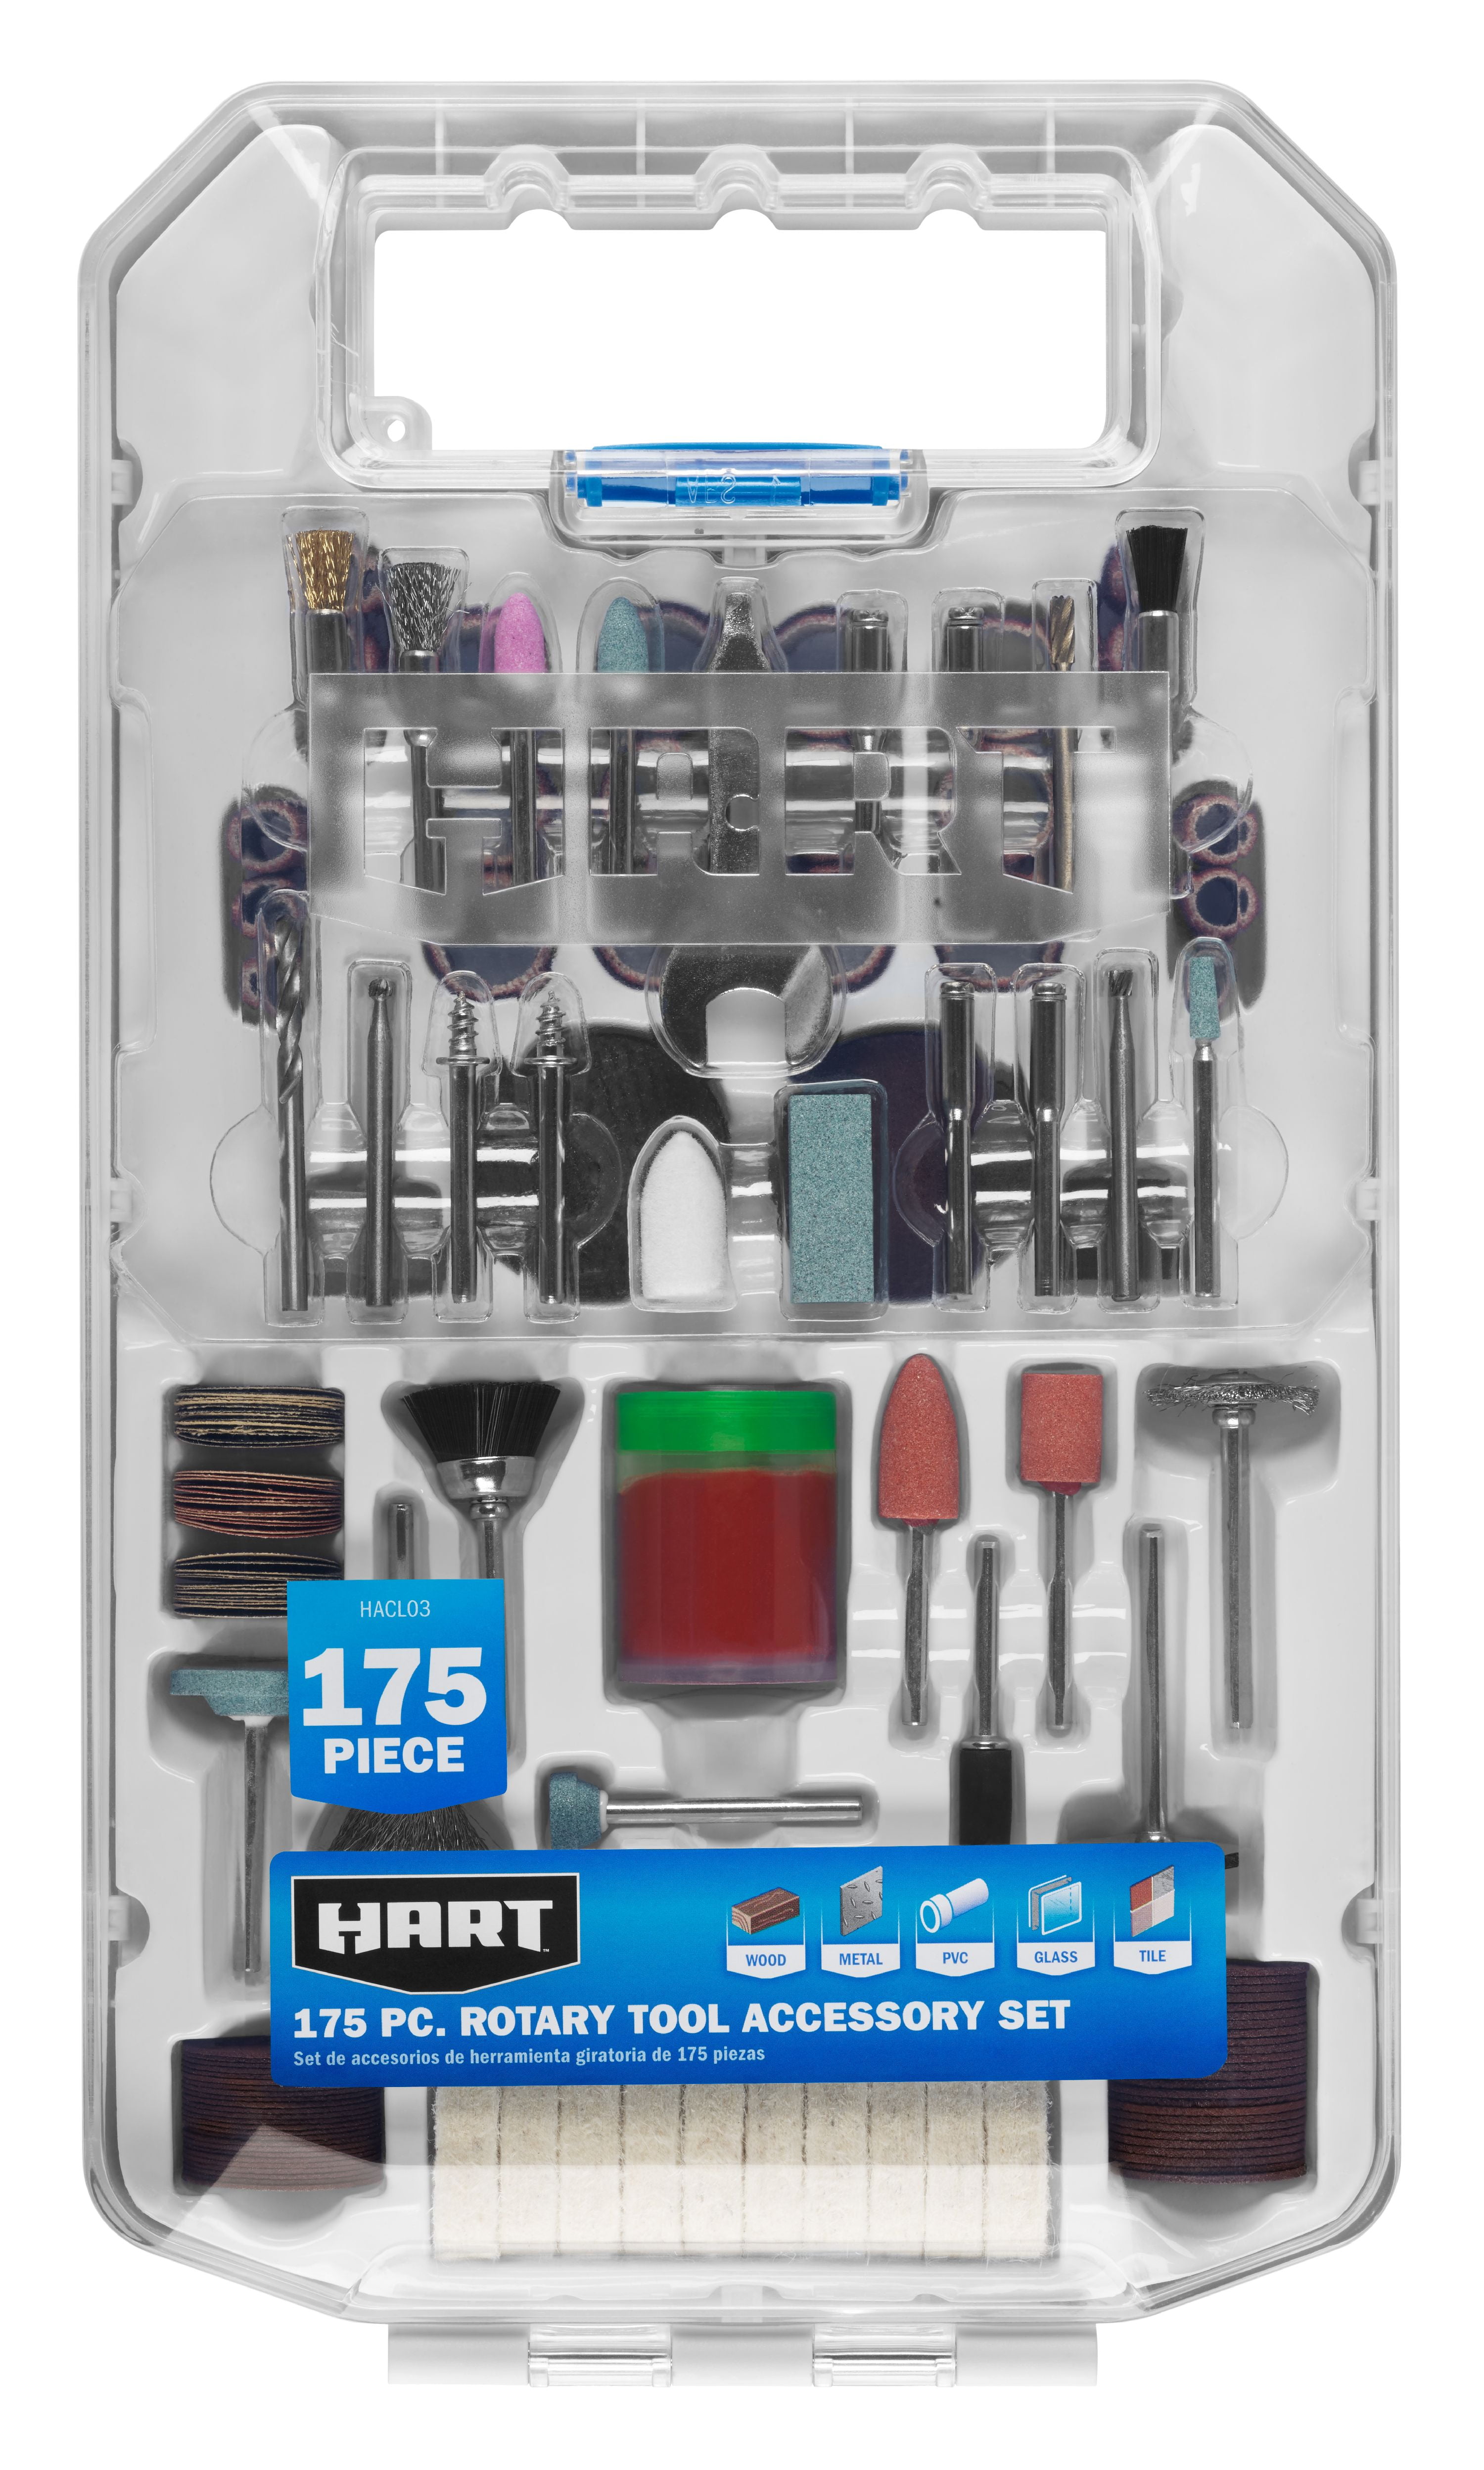 HART 175-Piece Rotary Tool Accessory Set with Protective Storage Case